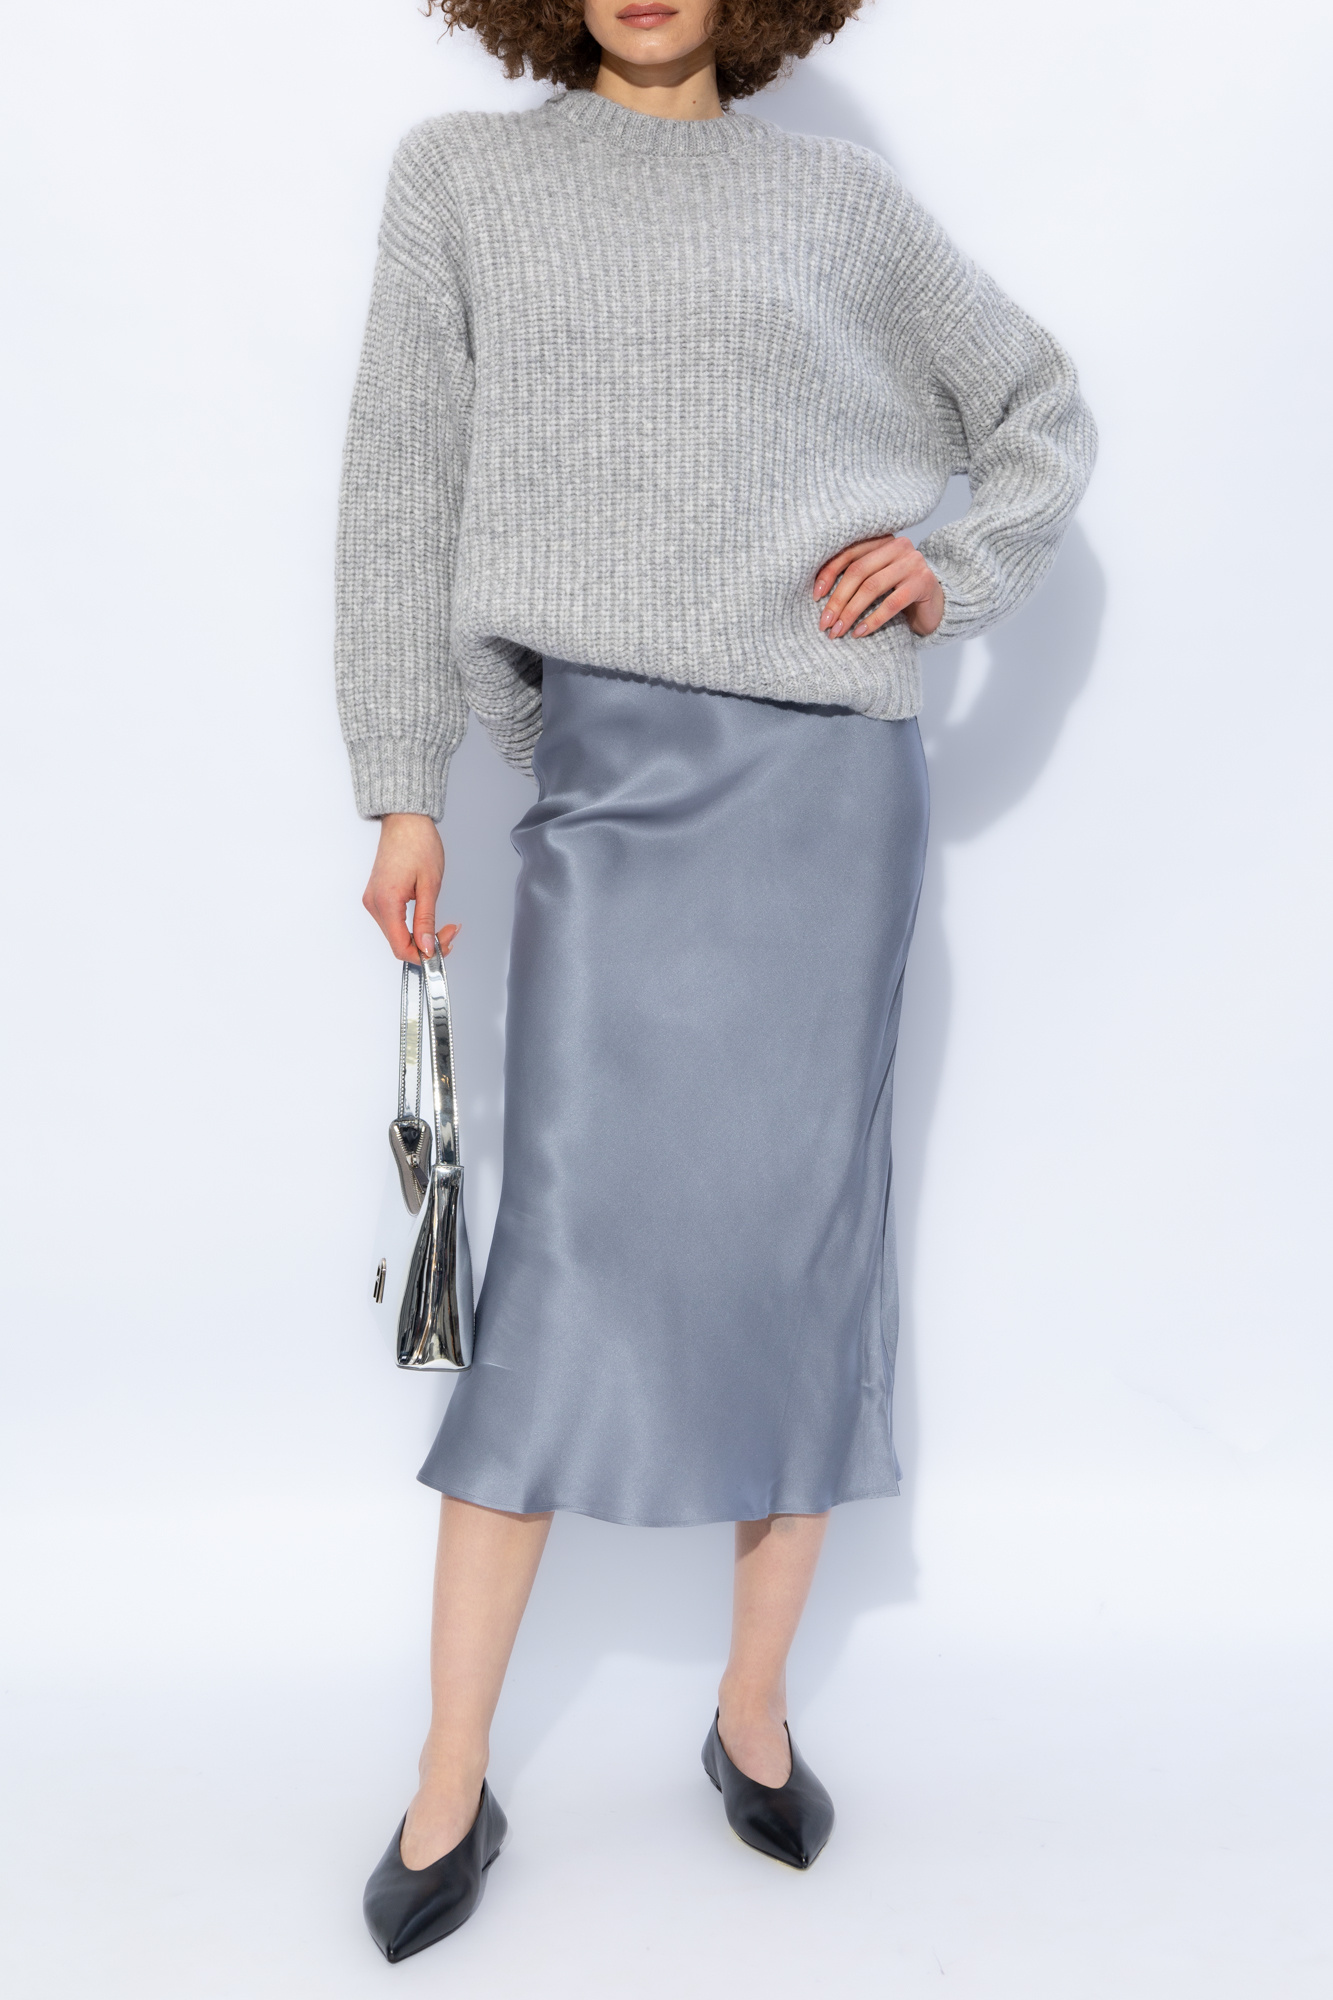 Anine Bing ‘Sydney’ thick knit Cropped sweater